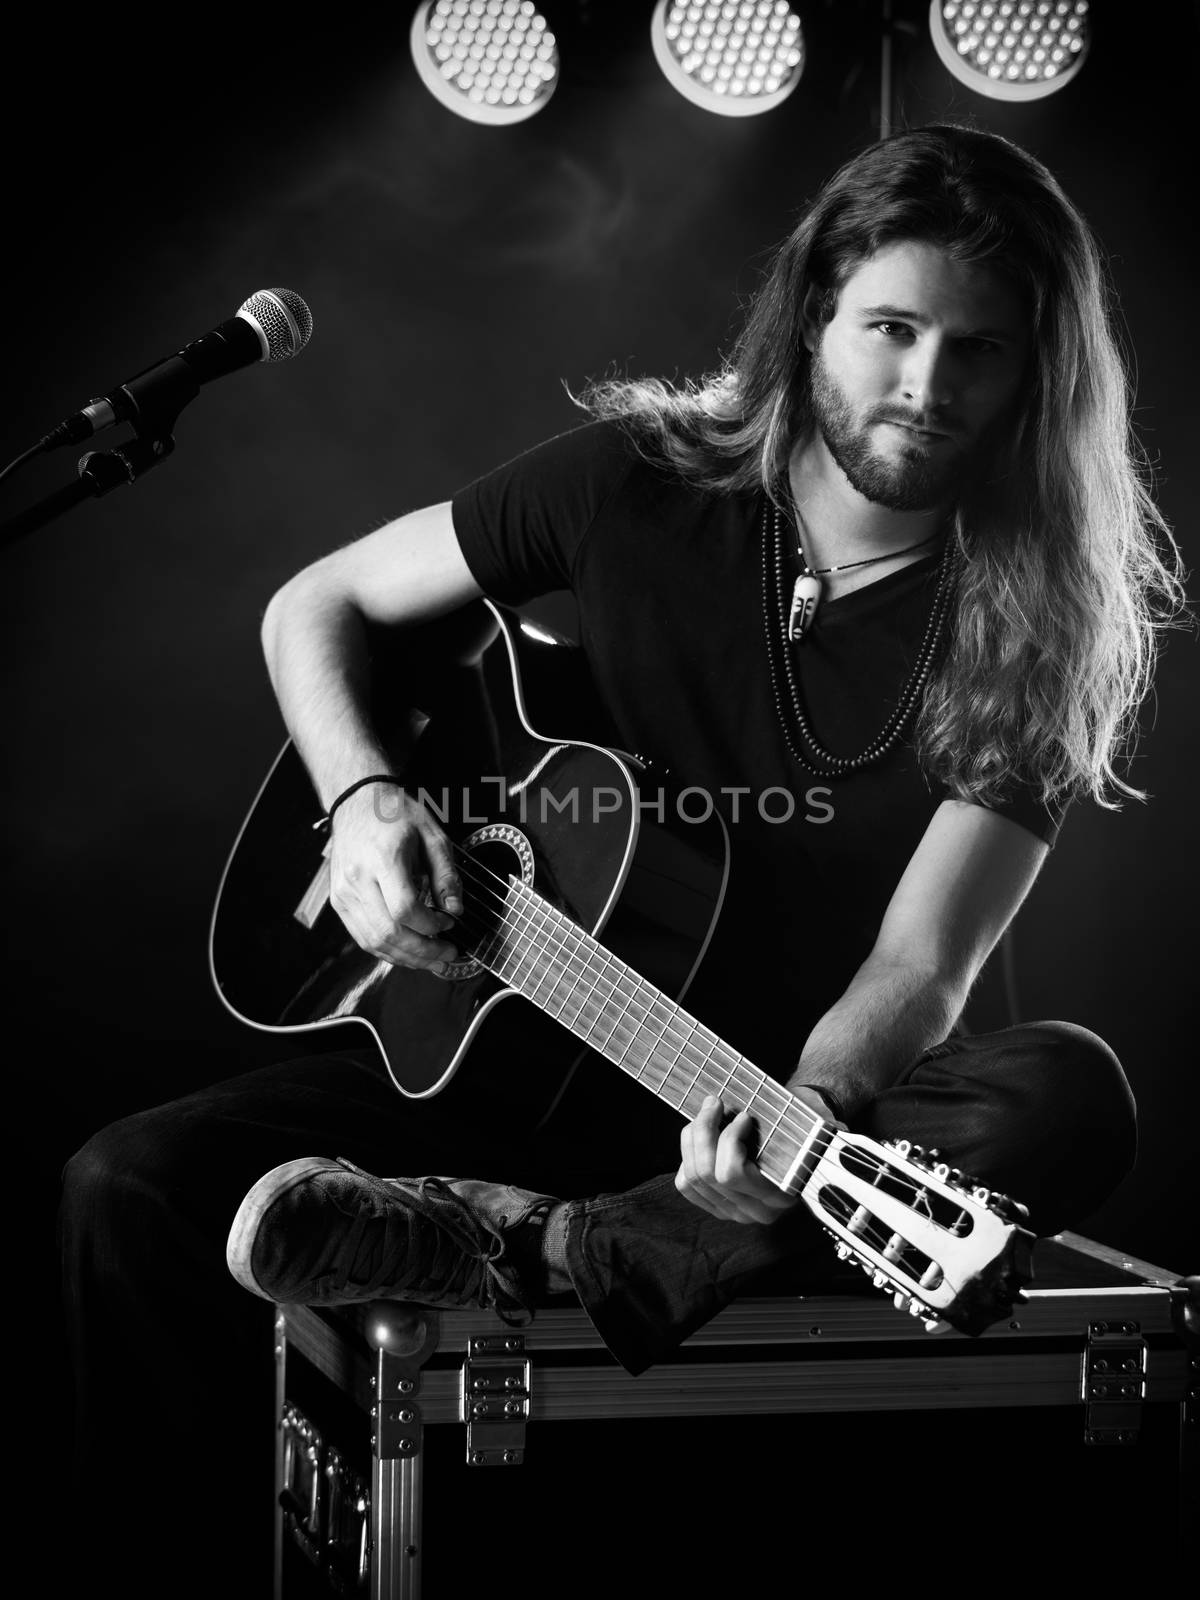 Man playing acoustic guitar on stage by sumners